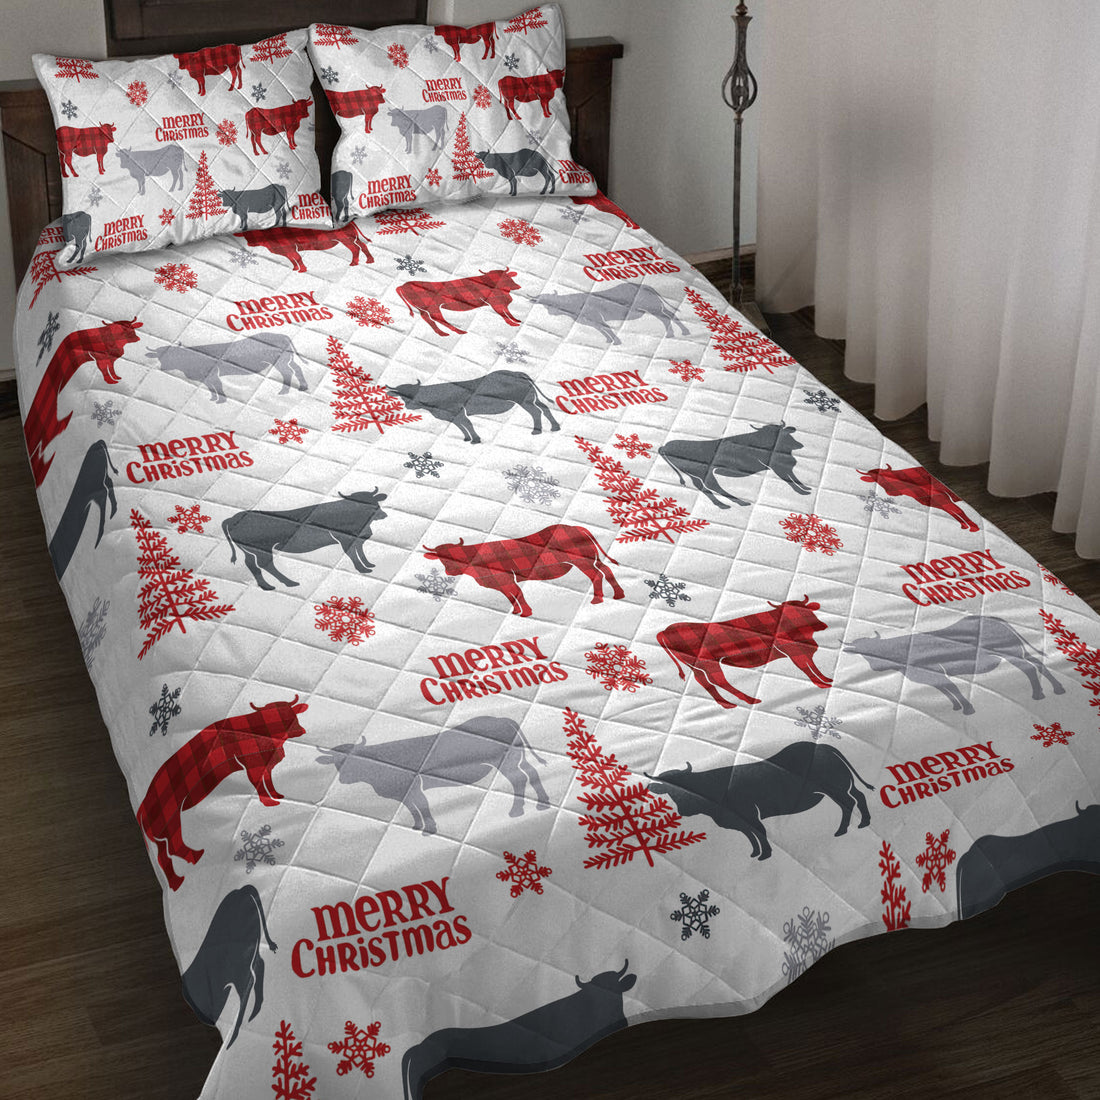 Ohaprints-Quilt-Bed-Set-Pillowcase-Cow-Farm-Animal-Country-With-Christmas-Tree-Snowflake-Unique-Gifts-Blanket-Bedspread-Bedding-4084-Throw (55'' x 60'')